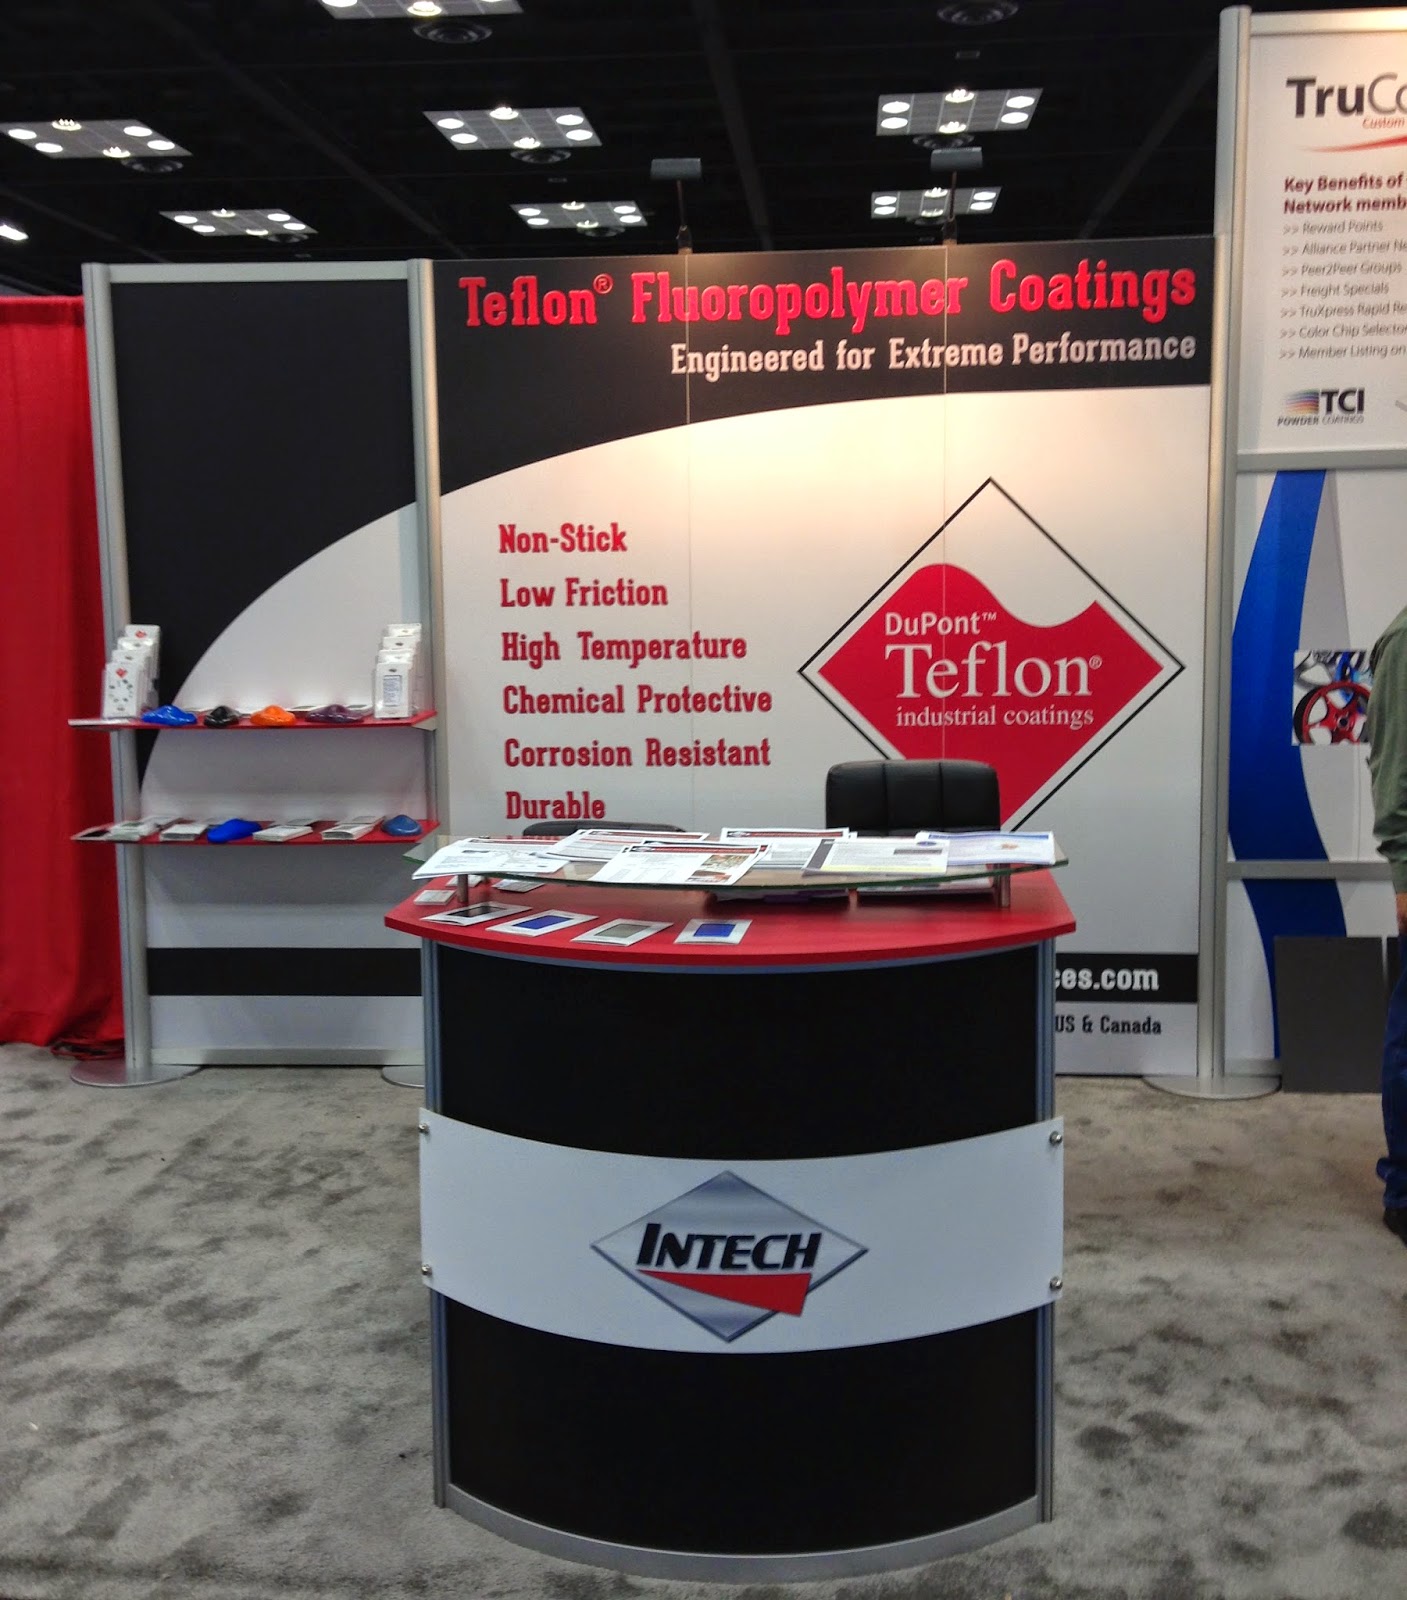 The Intech Insider From The Powder Coating Show